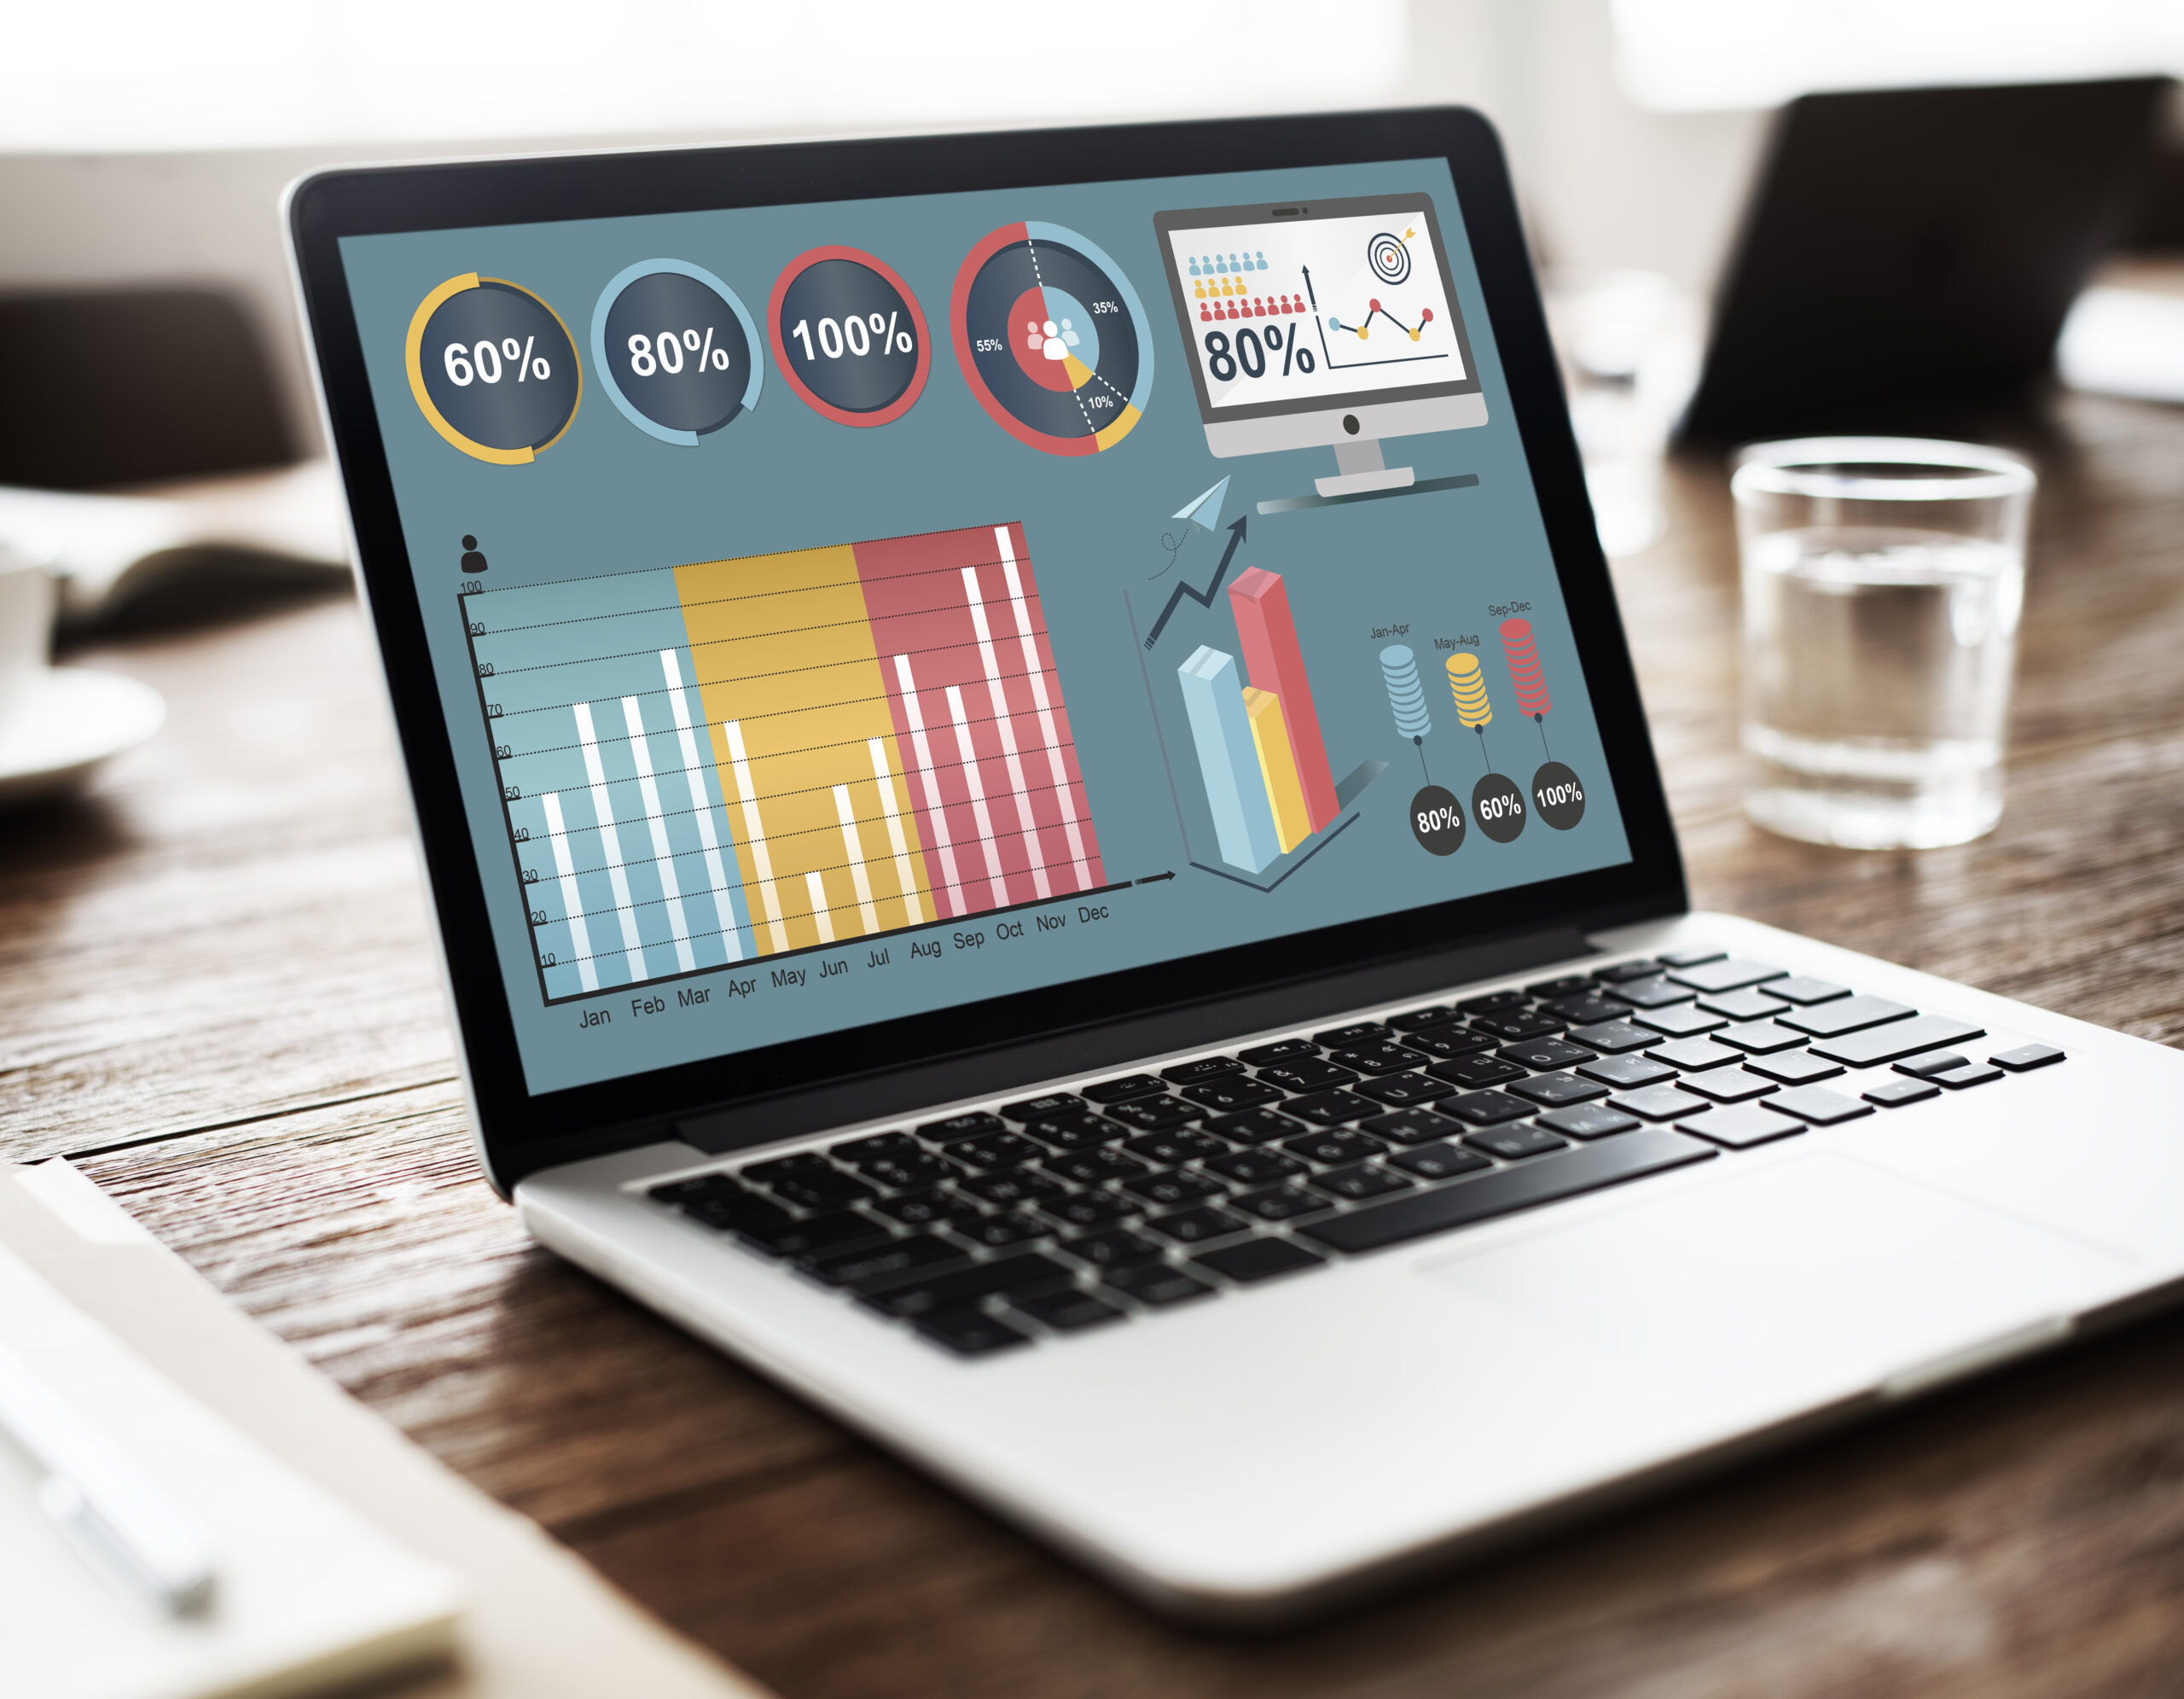 Does your CRM provide your sales team with the correct data insights?